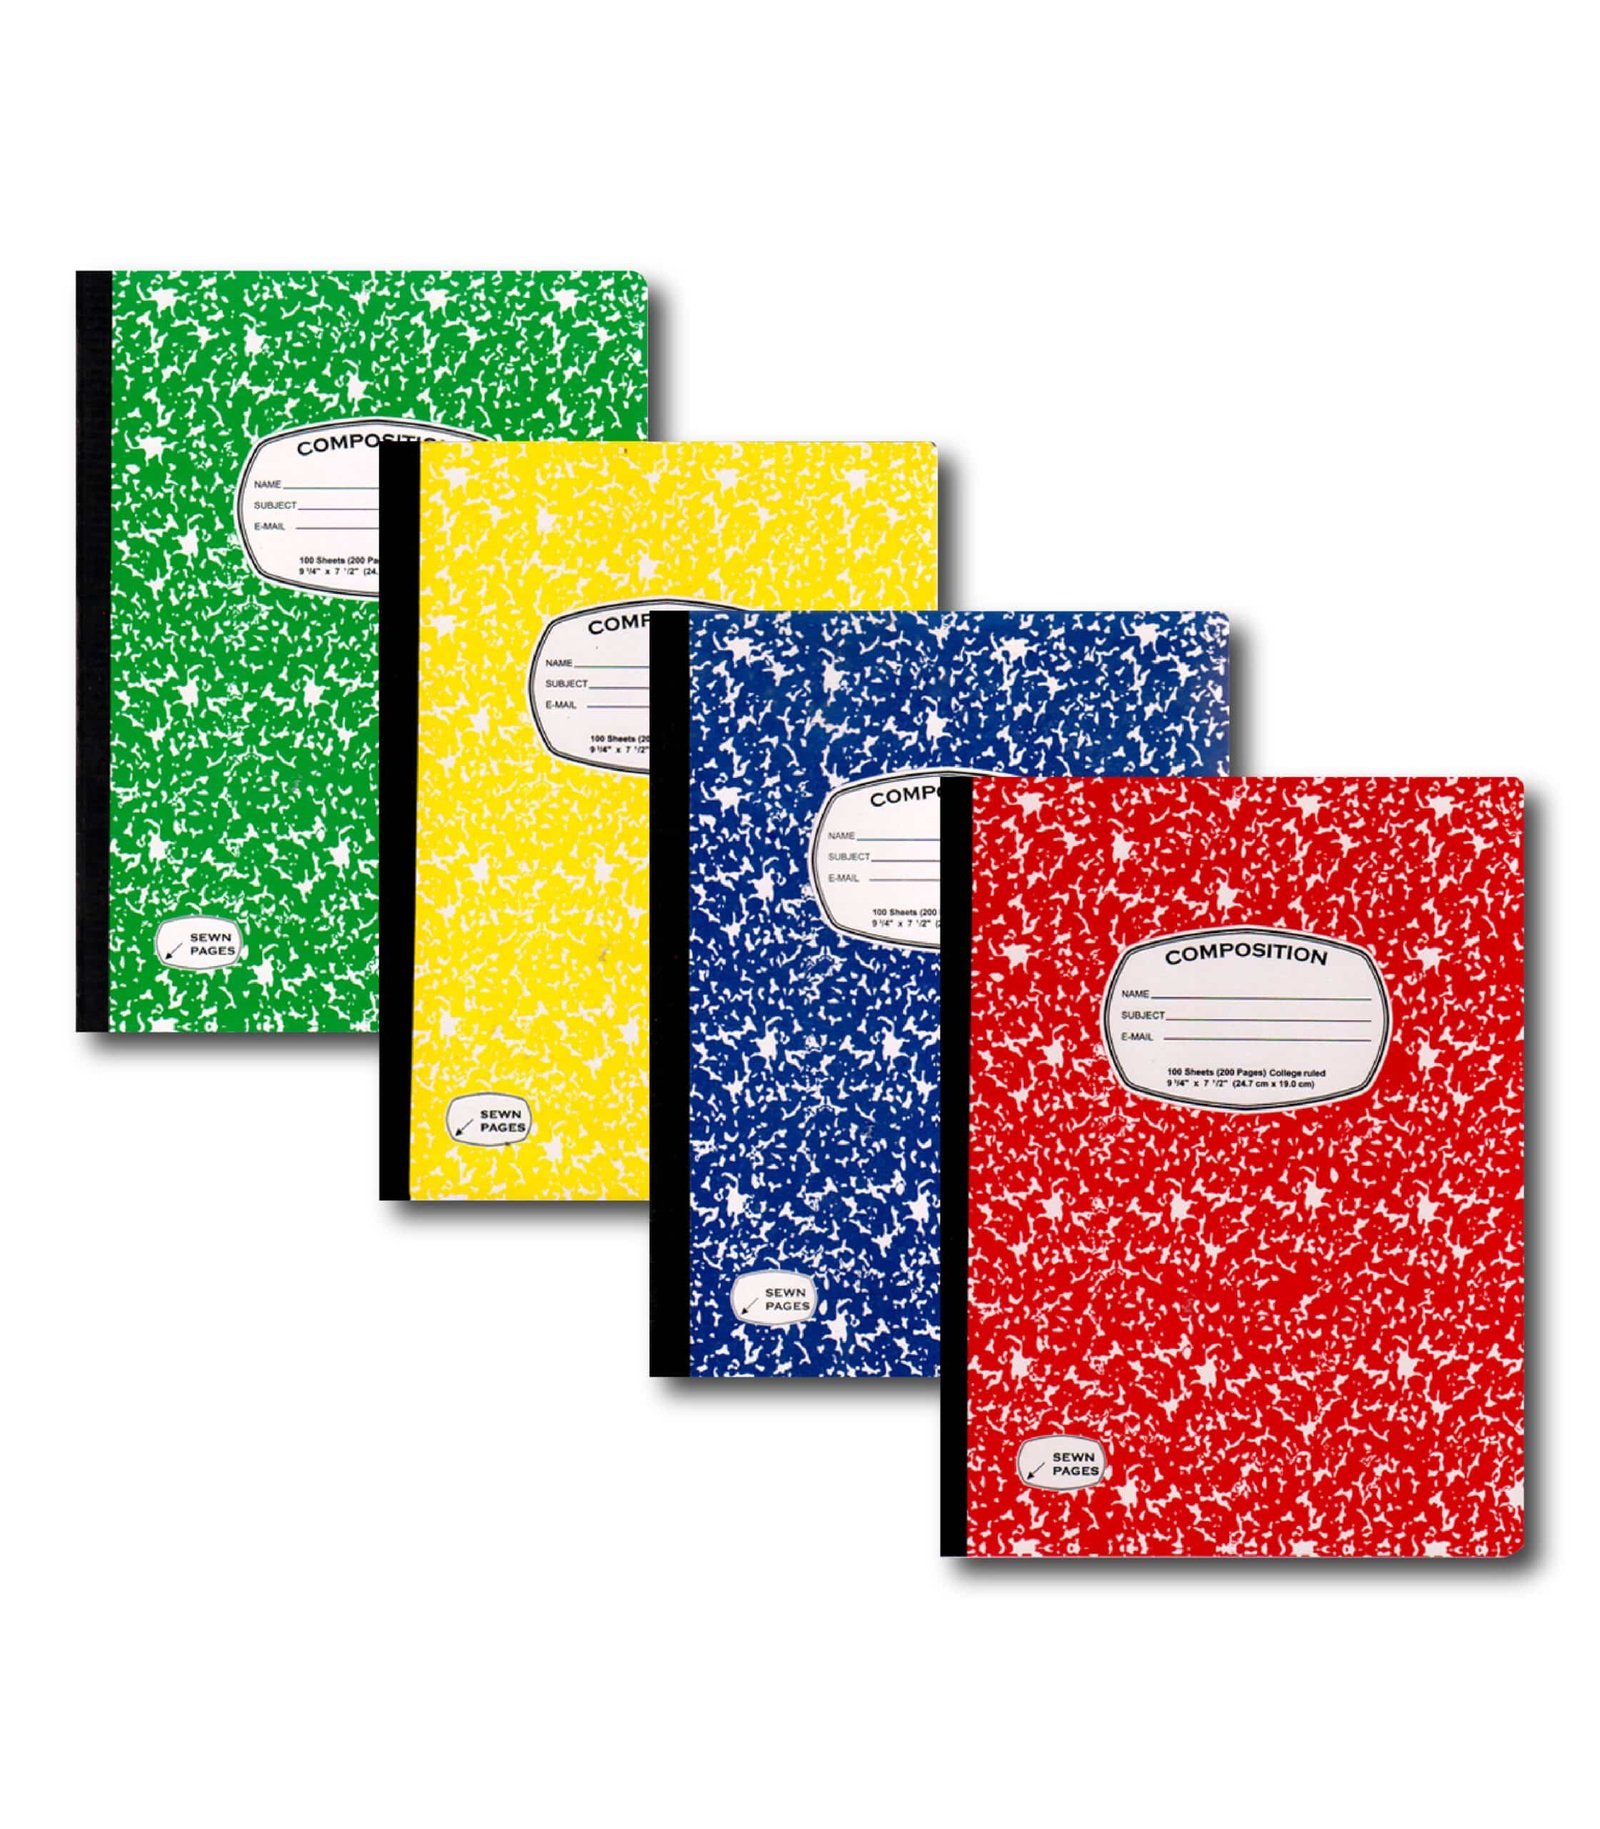 Primary Journal Marble Composition Book 100 sheets - Assorted Colors